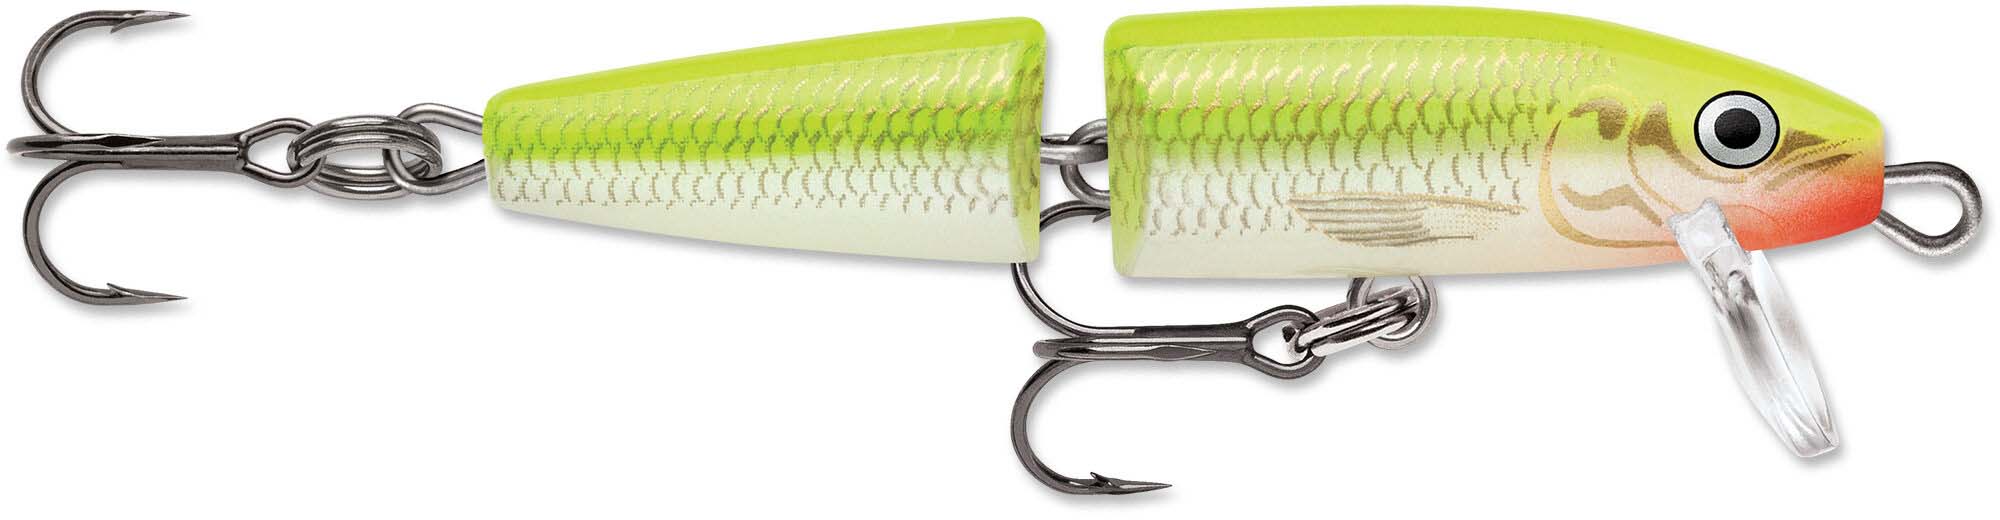 Rapala Jointed 05 Lure  Up to 20% Off Free Shipping over $49!